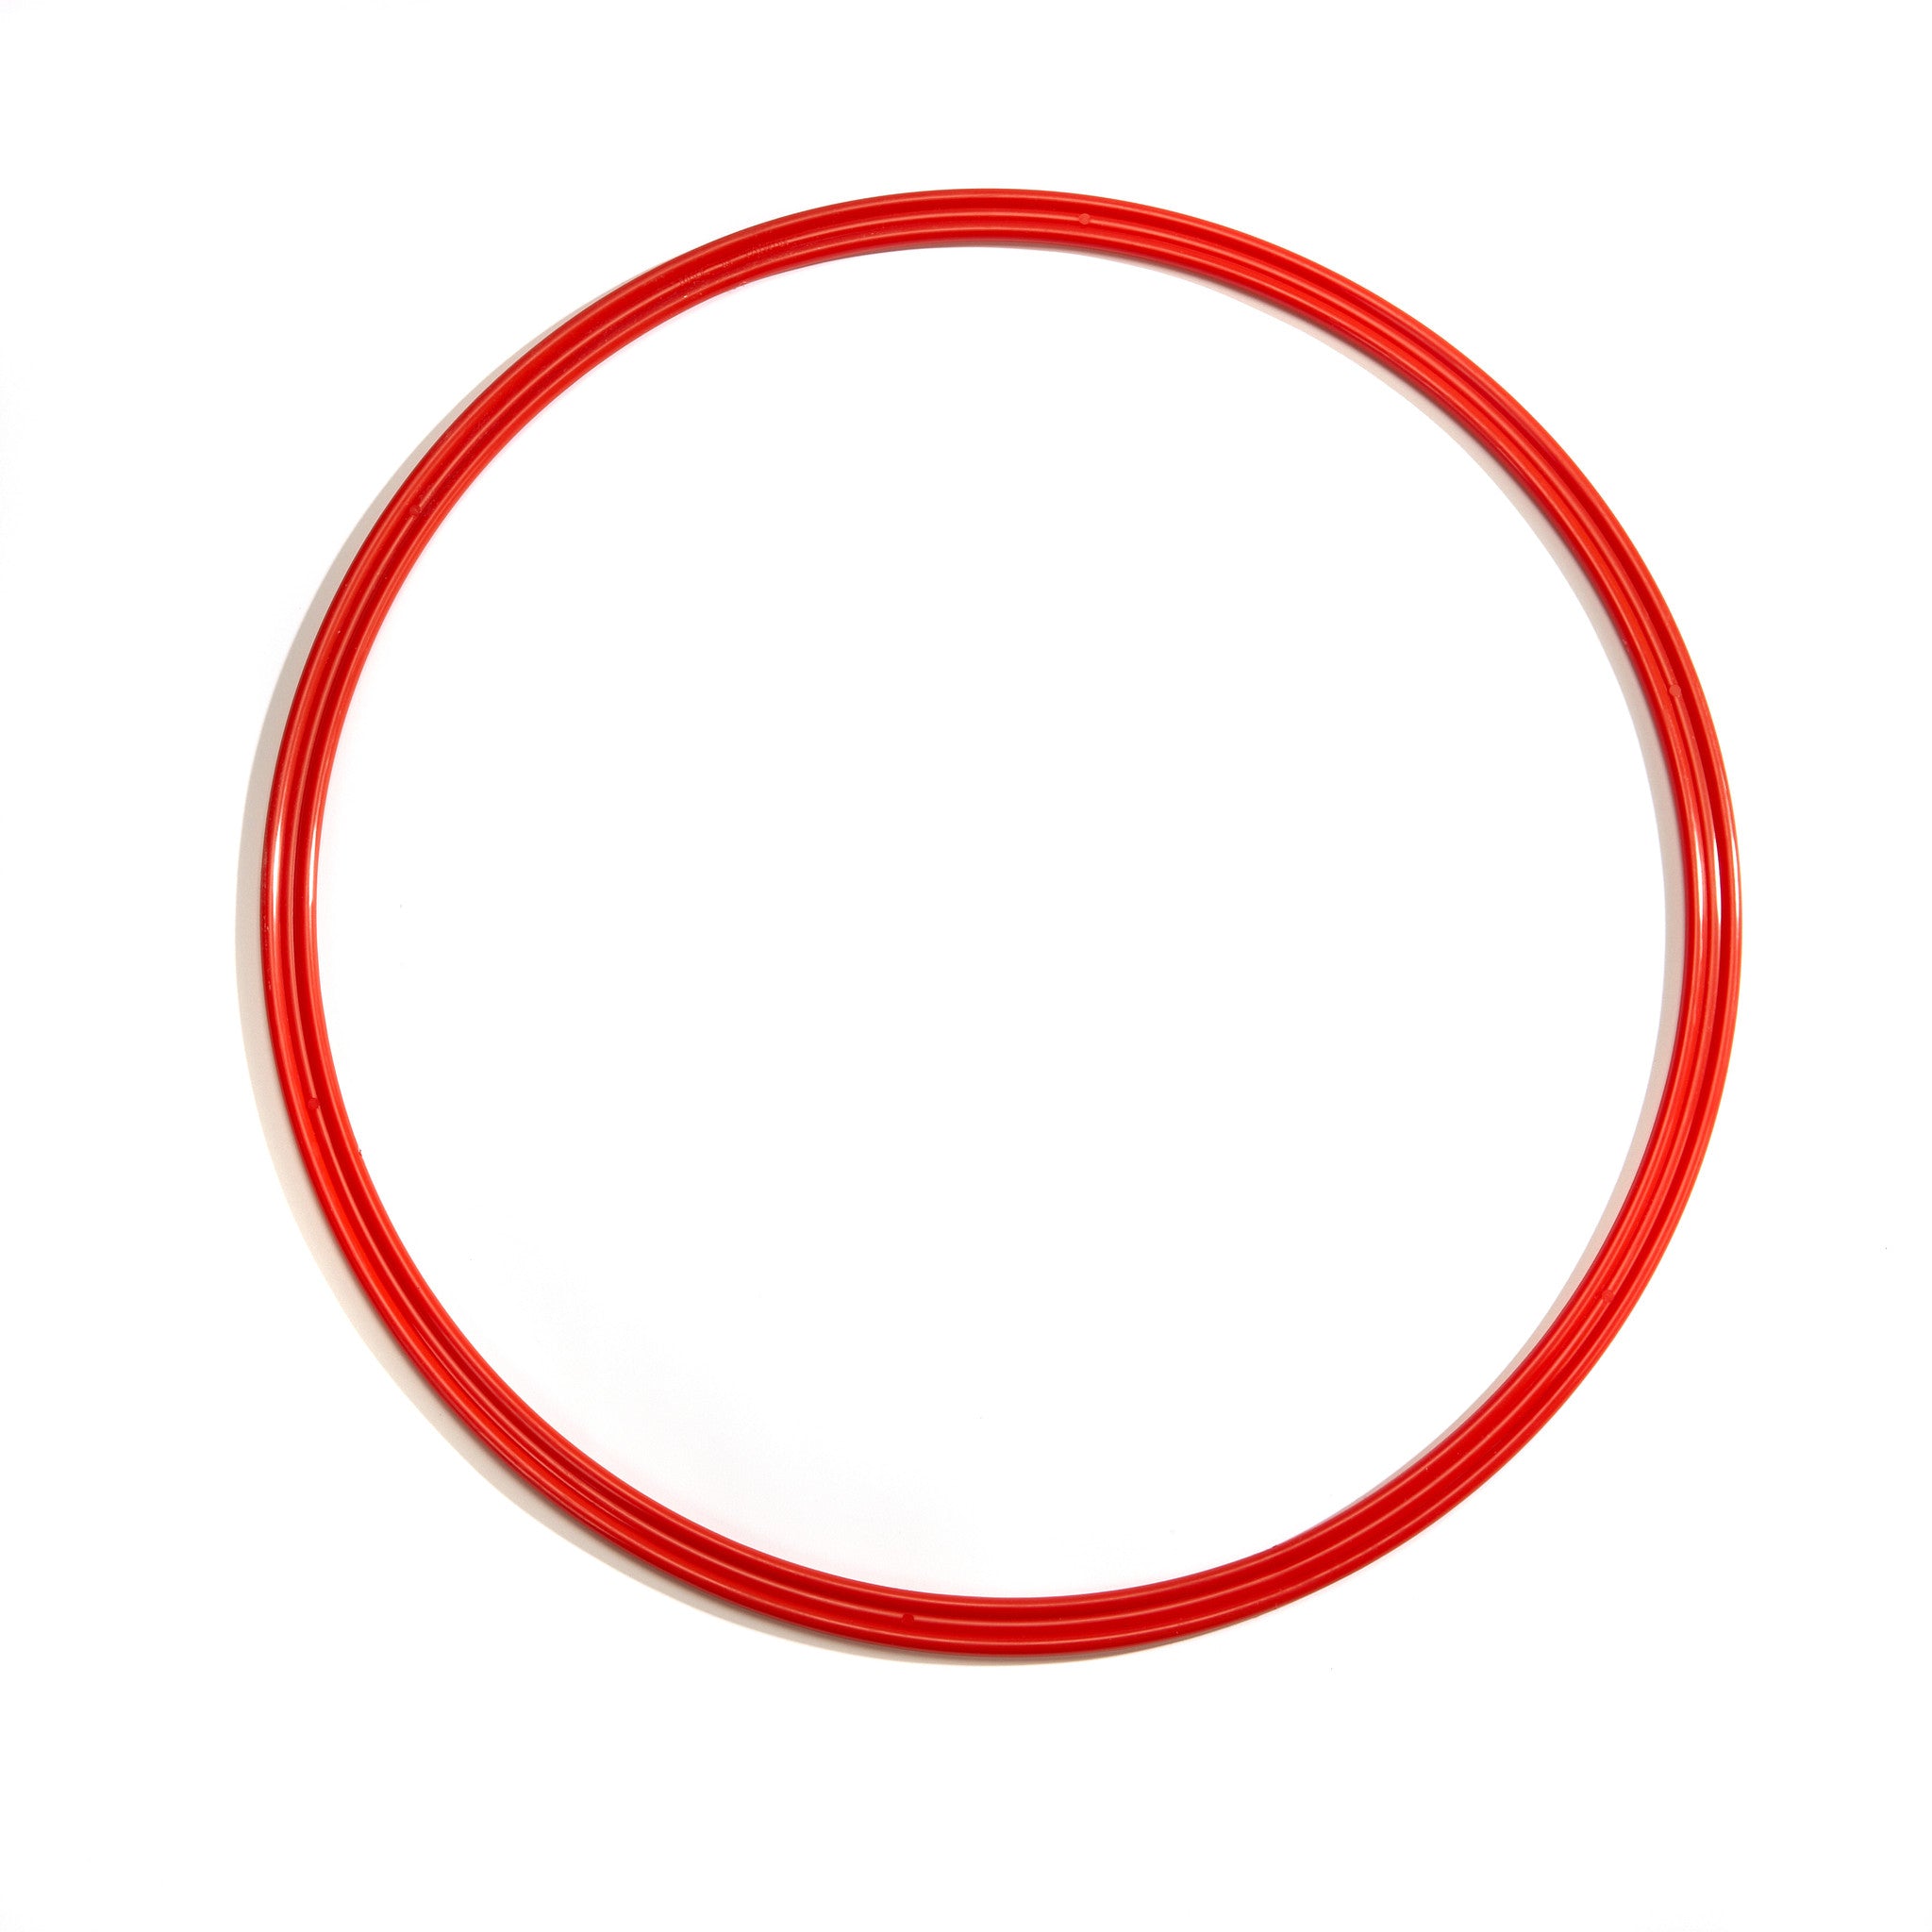 Red 50cm flat hoop for sports coaching & training.